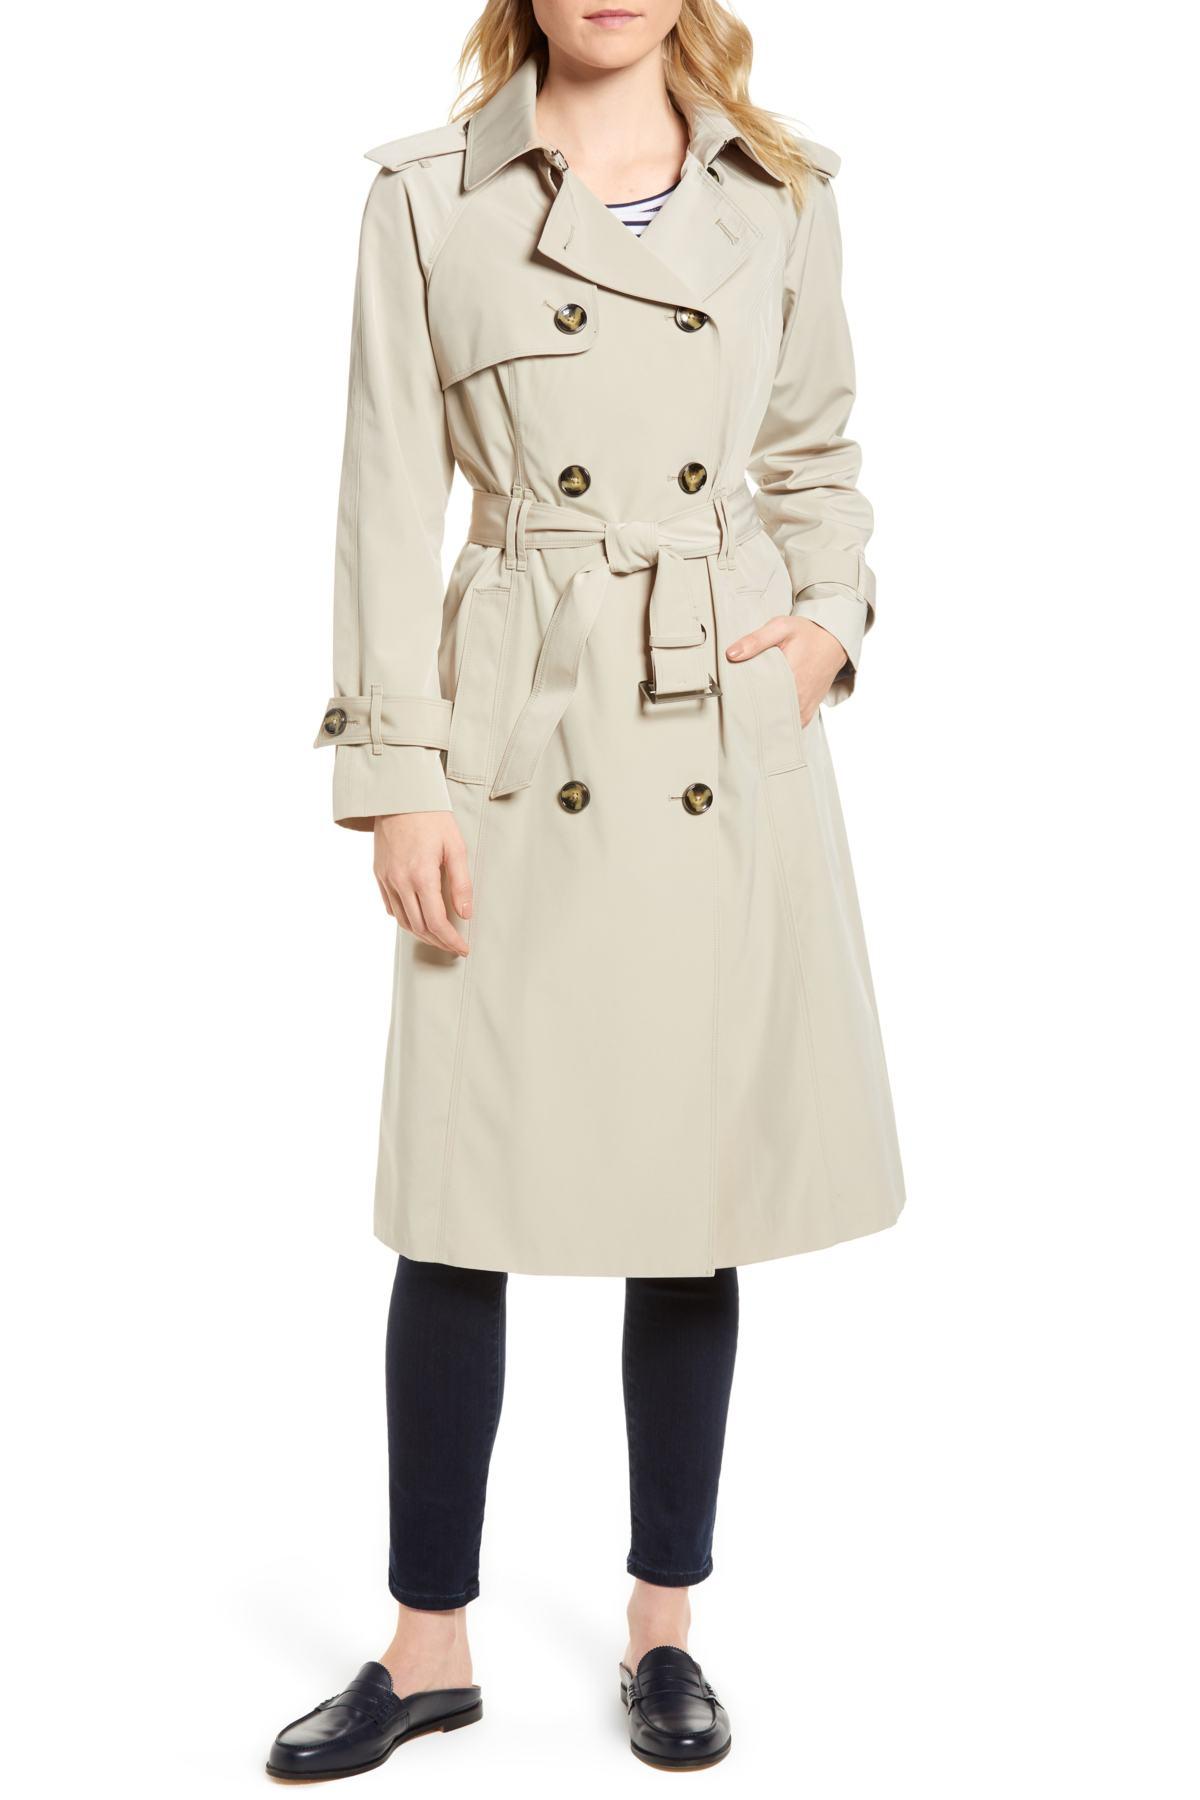 London Fog Synthetic Long Double Breasted Trench Coat in Stone (Natural) - Lyst